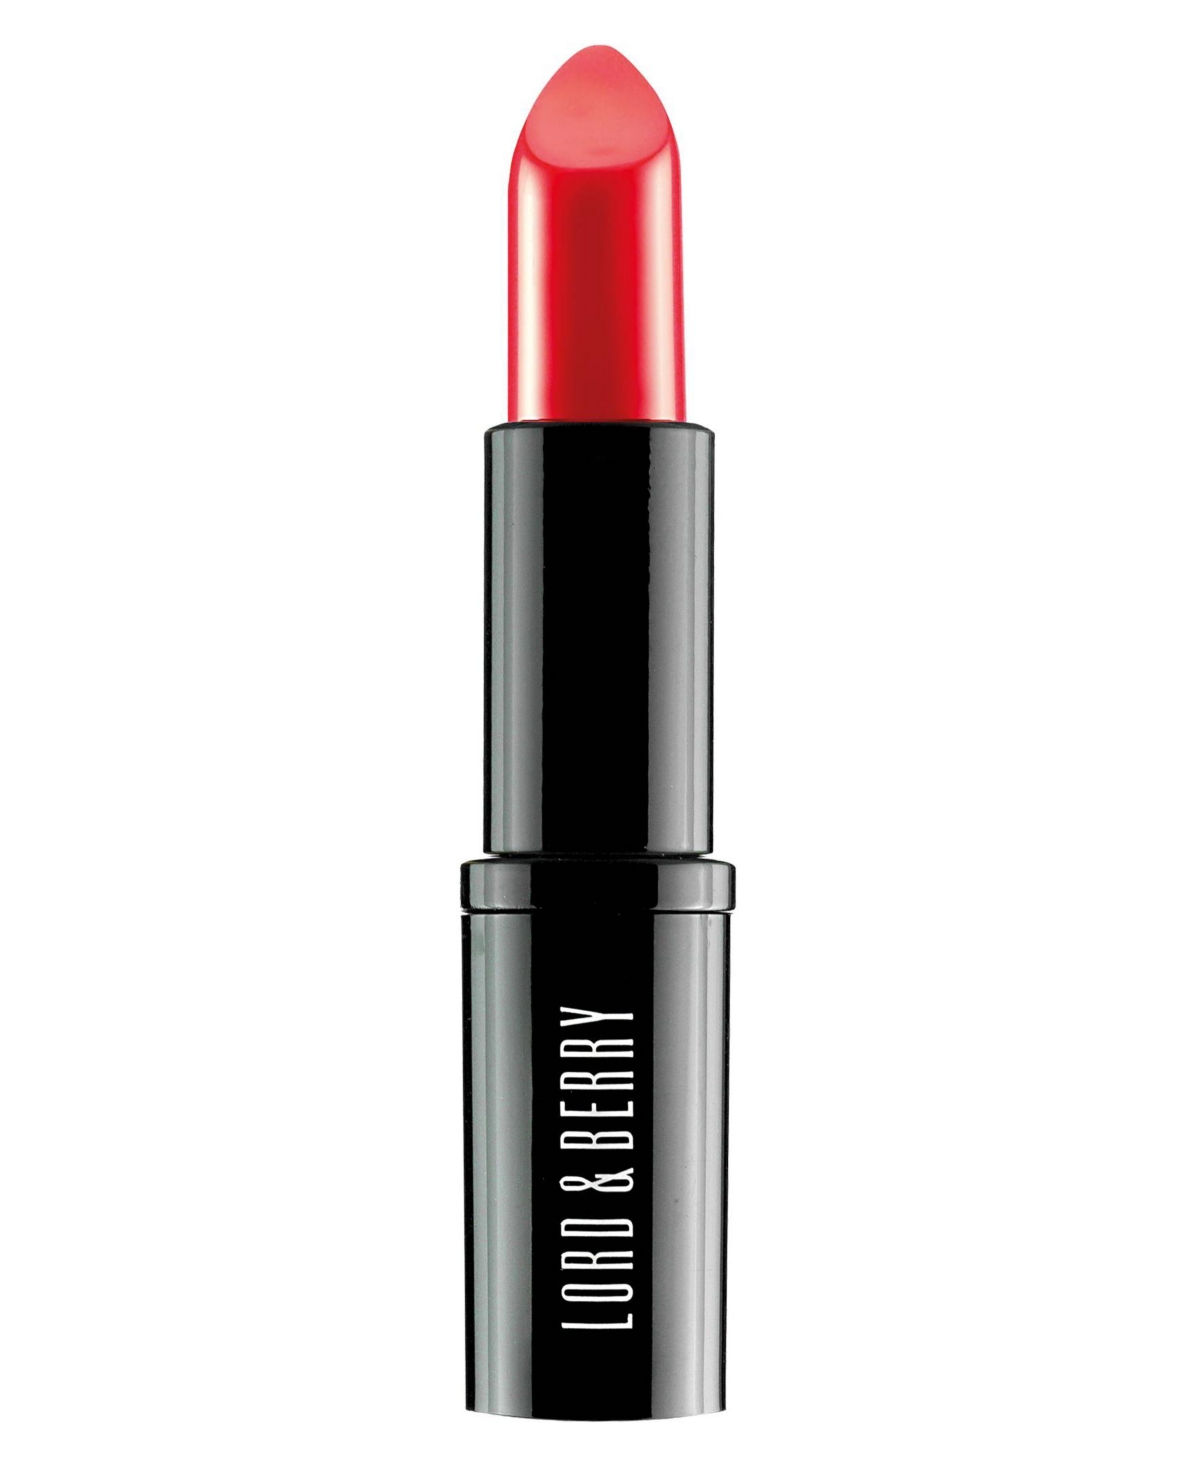 Lord & Berry Vogue Matte Lipstick In Red Queen - Classic Scarlet Red